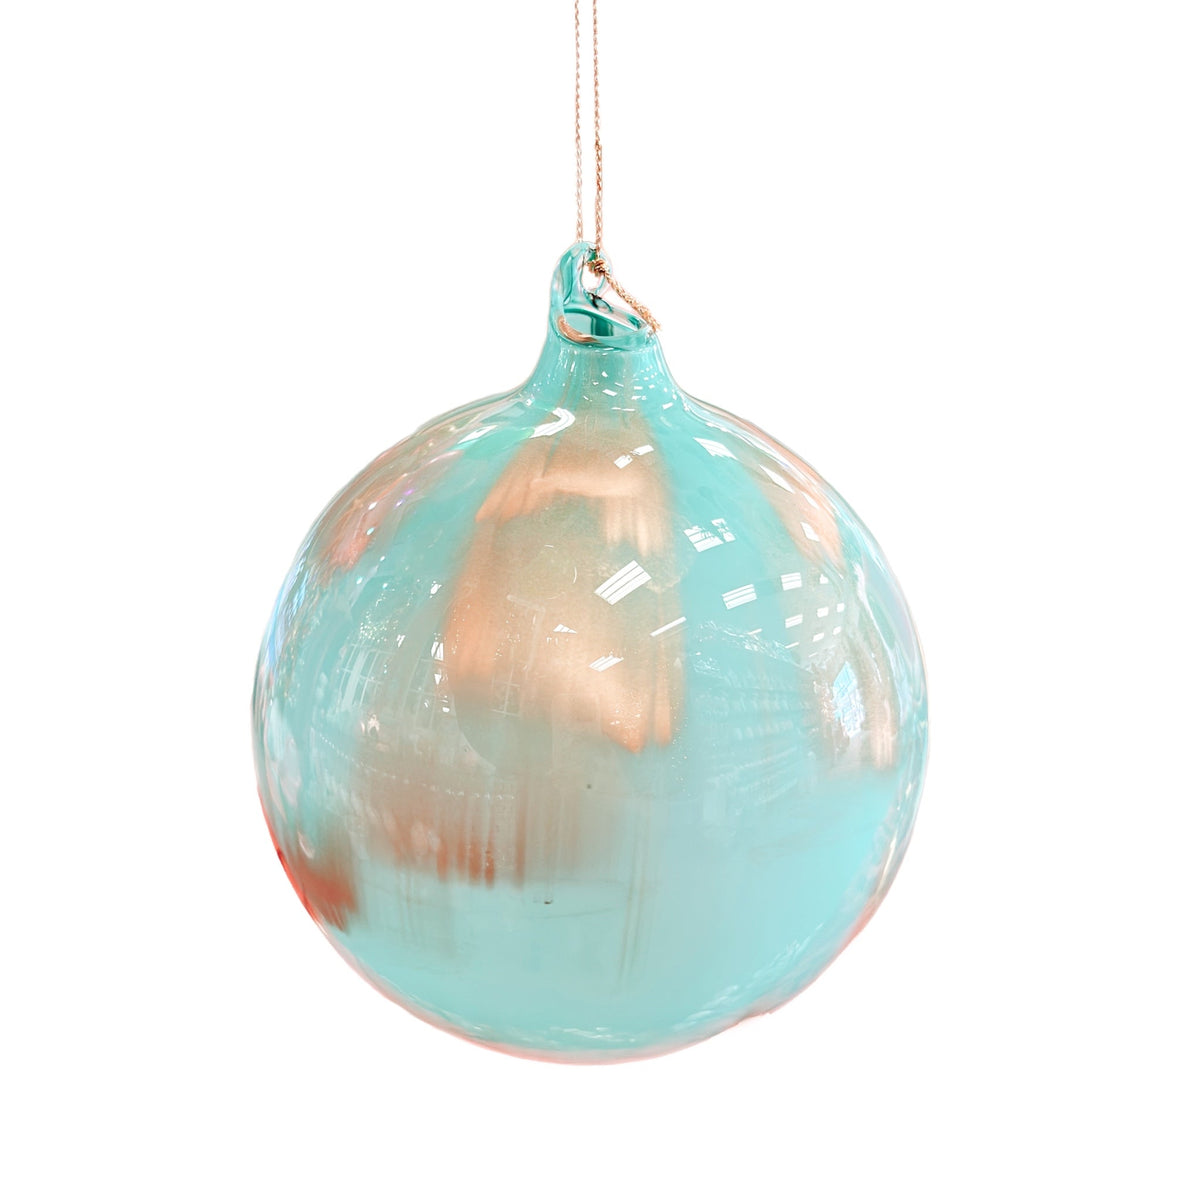 120MM Turquoise Metallic Marble Gold Glass Ball Ornament by Jim Marvin - Holiday Warehouse